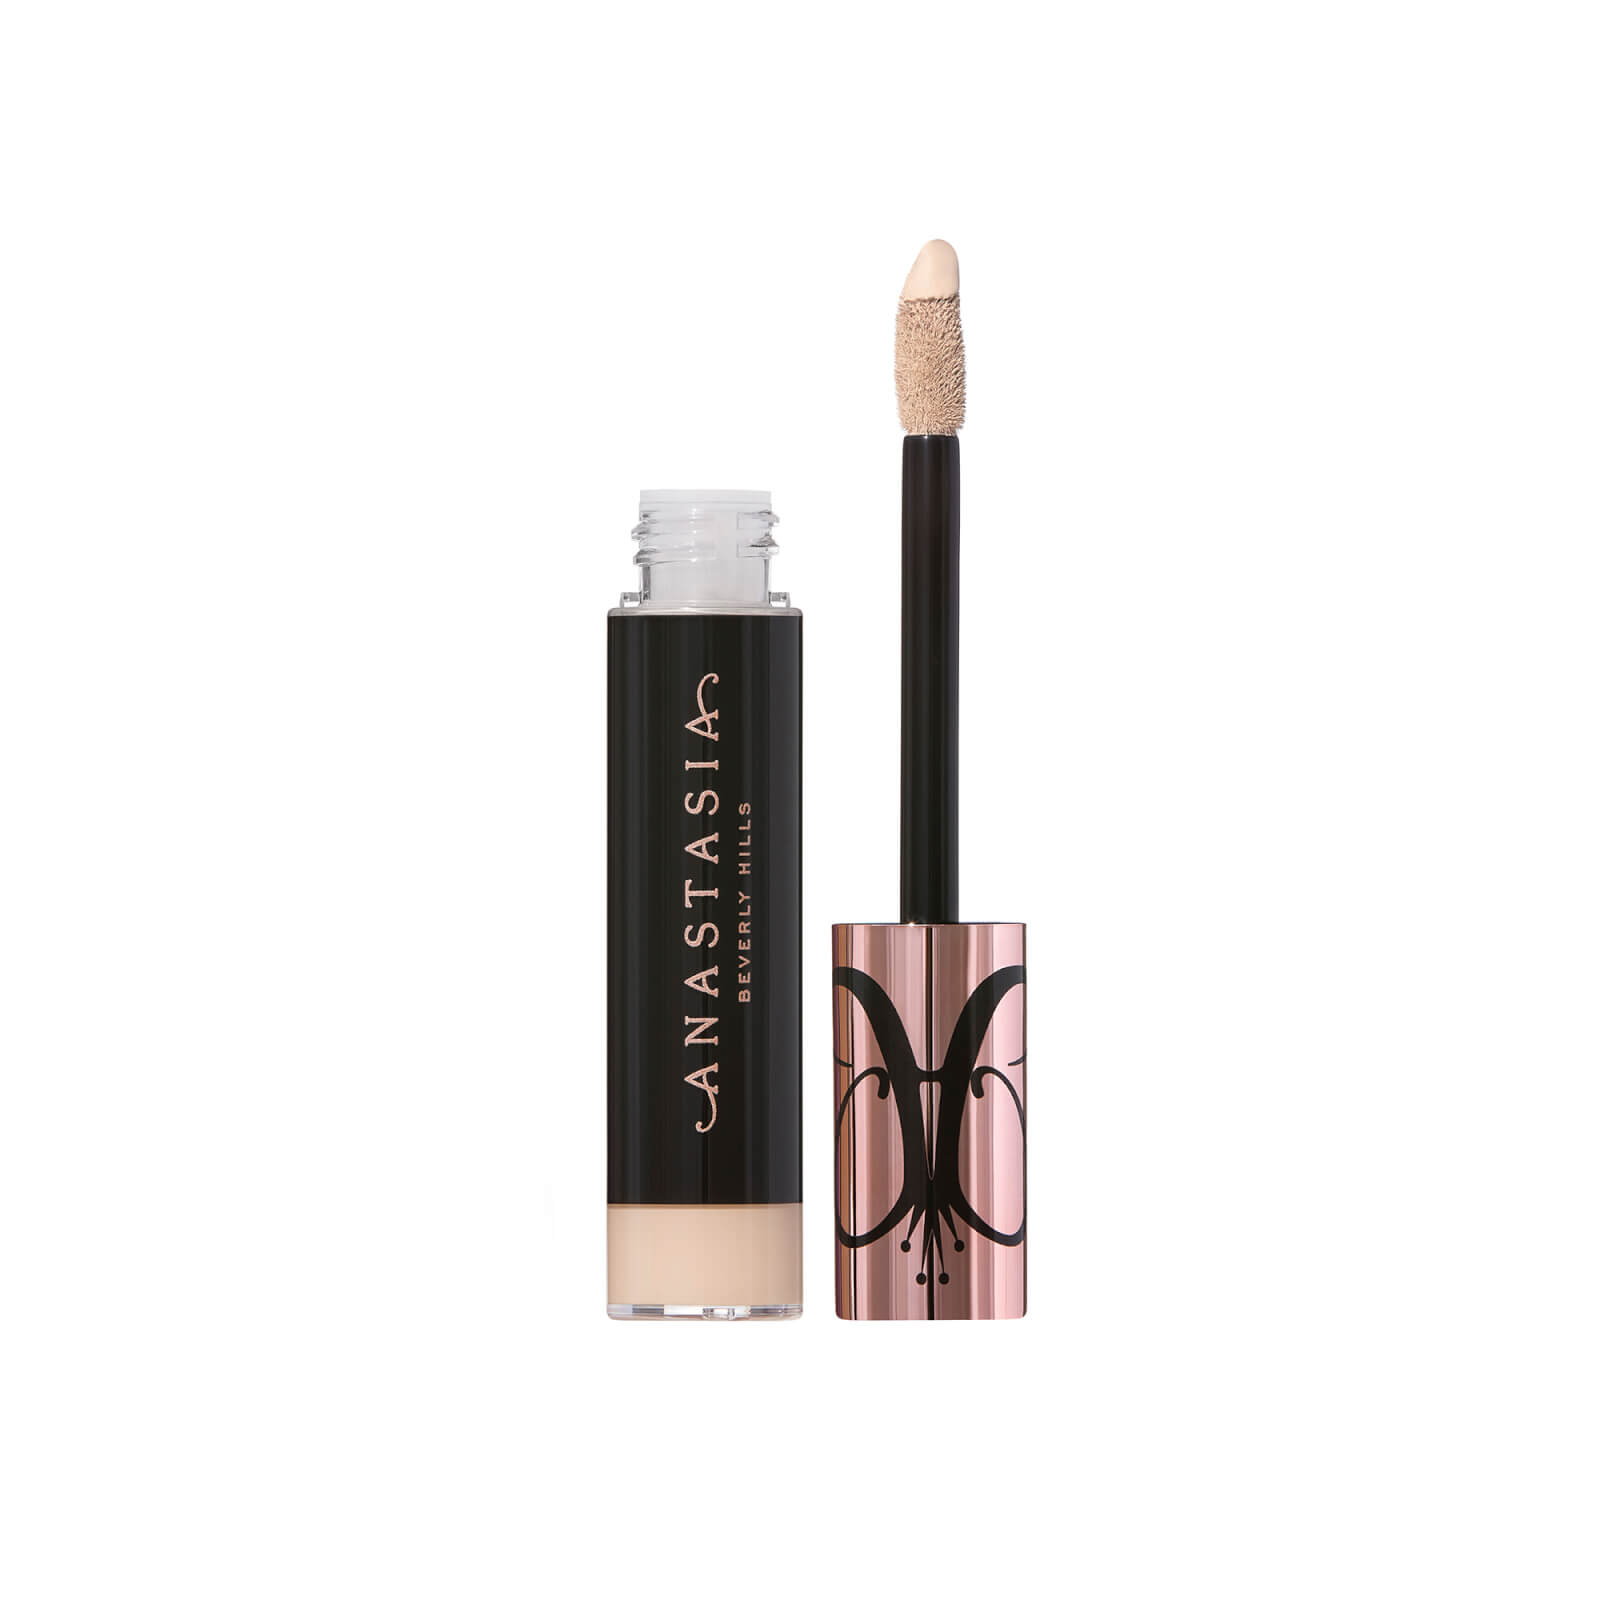 Anastasia Beverly Hills Magic Touch Concealer 12ml (Various Shades) - 6